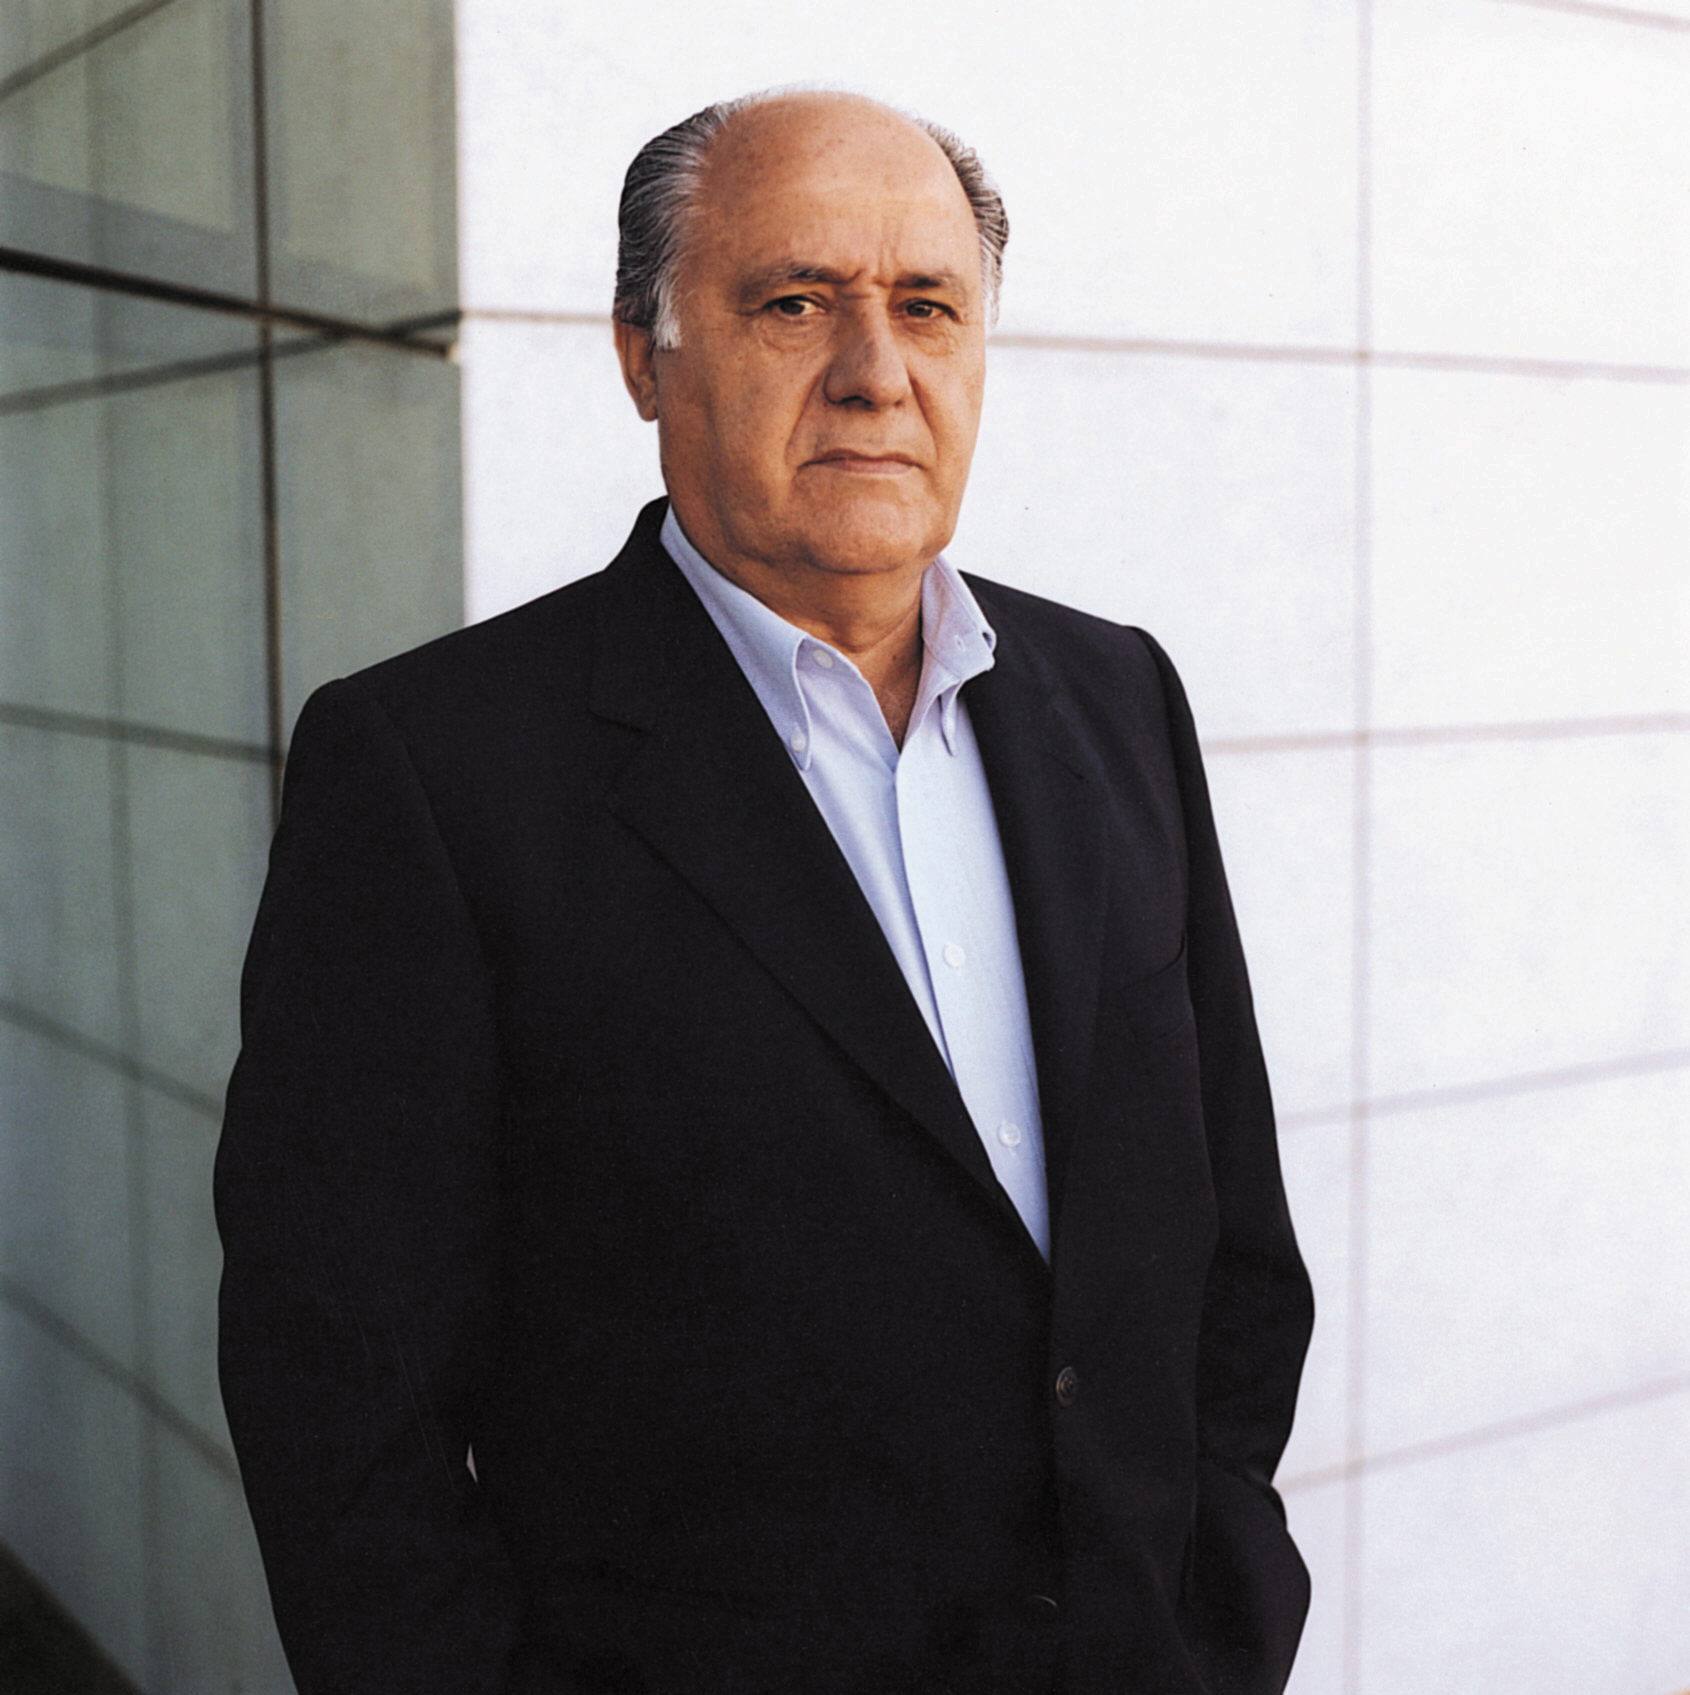 The richest man in Spain, Amancio Ortega, co-founded fashion giant Inditex, which owns brands like Zara, Bershka, Pull&Bear and Massimo Dutti. Photo: AFP